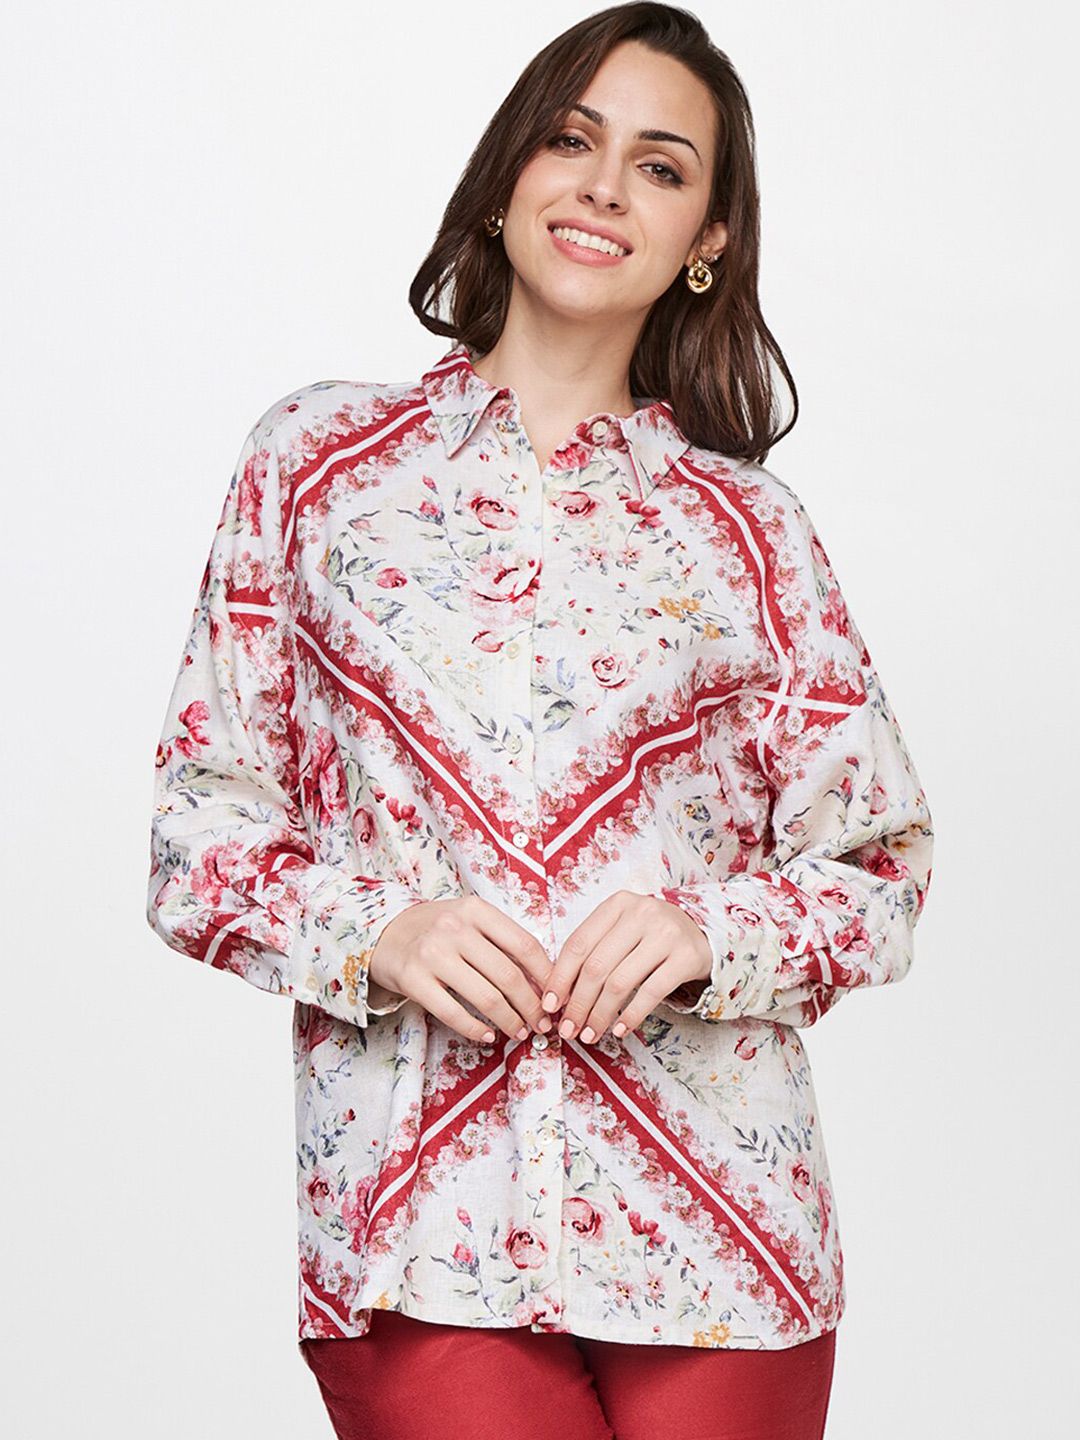 AND White & Red Floral Print Linen Top Price in India